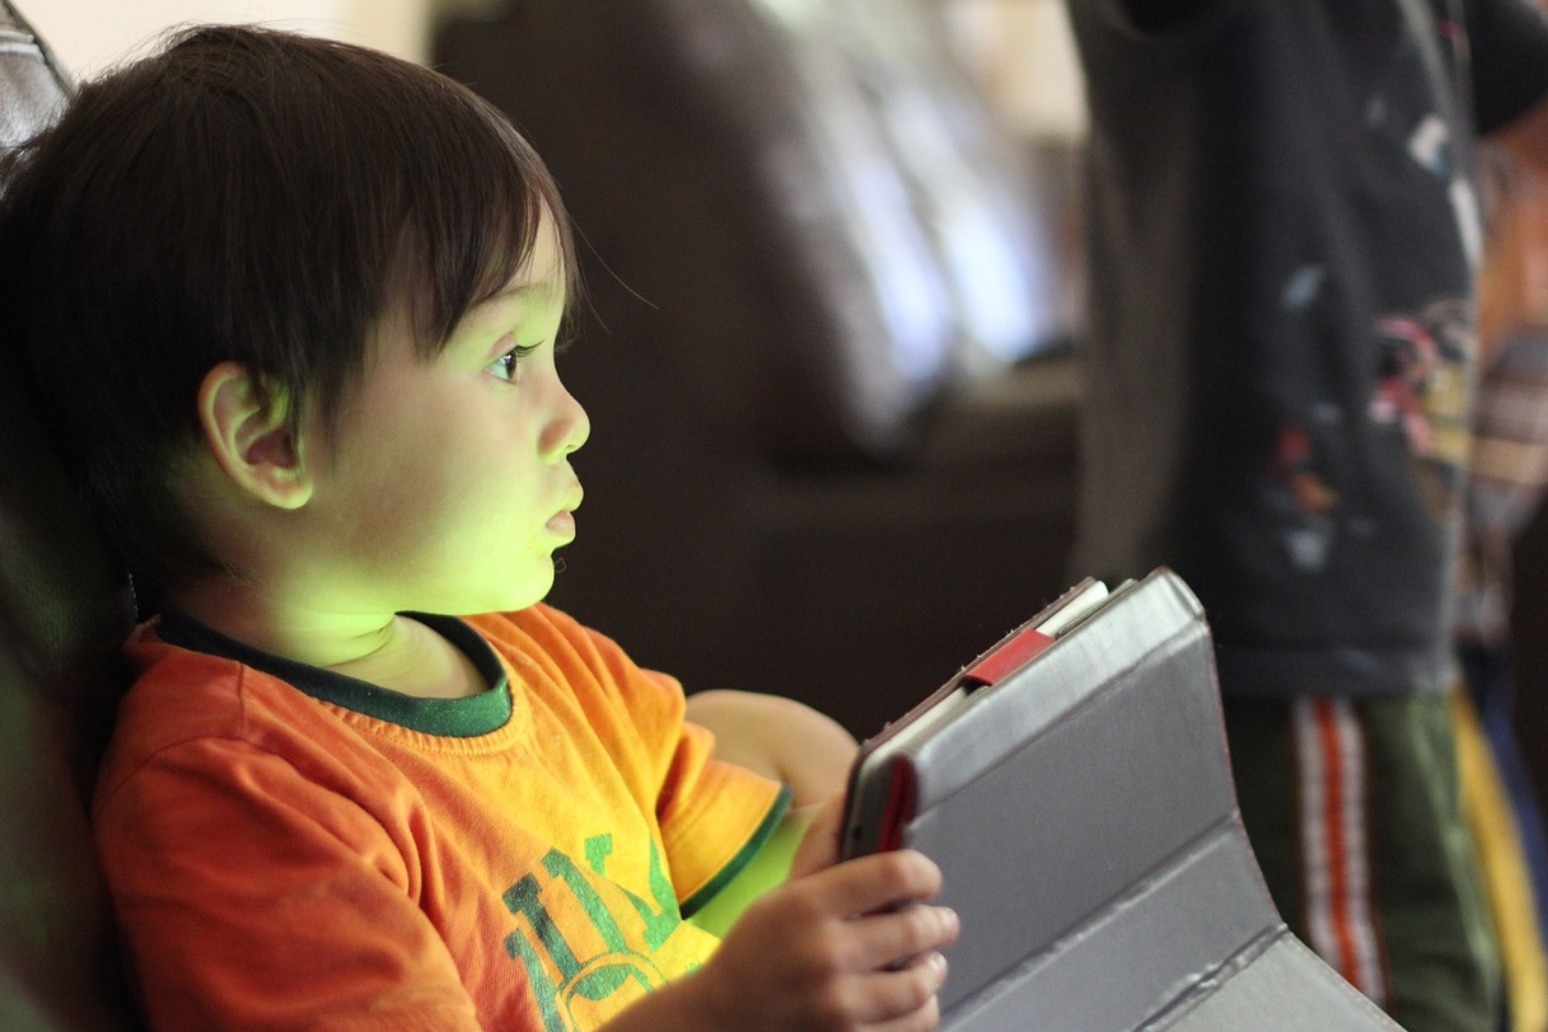 Not enough evidence to confirm screen time is harmful to children - report 